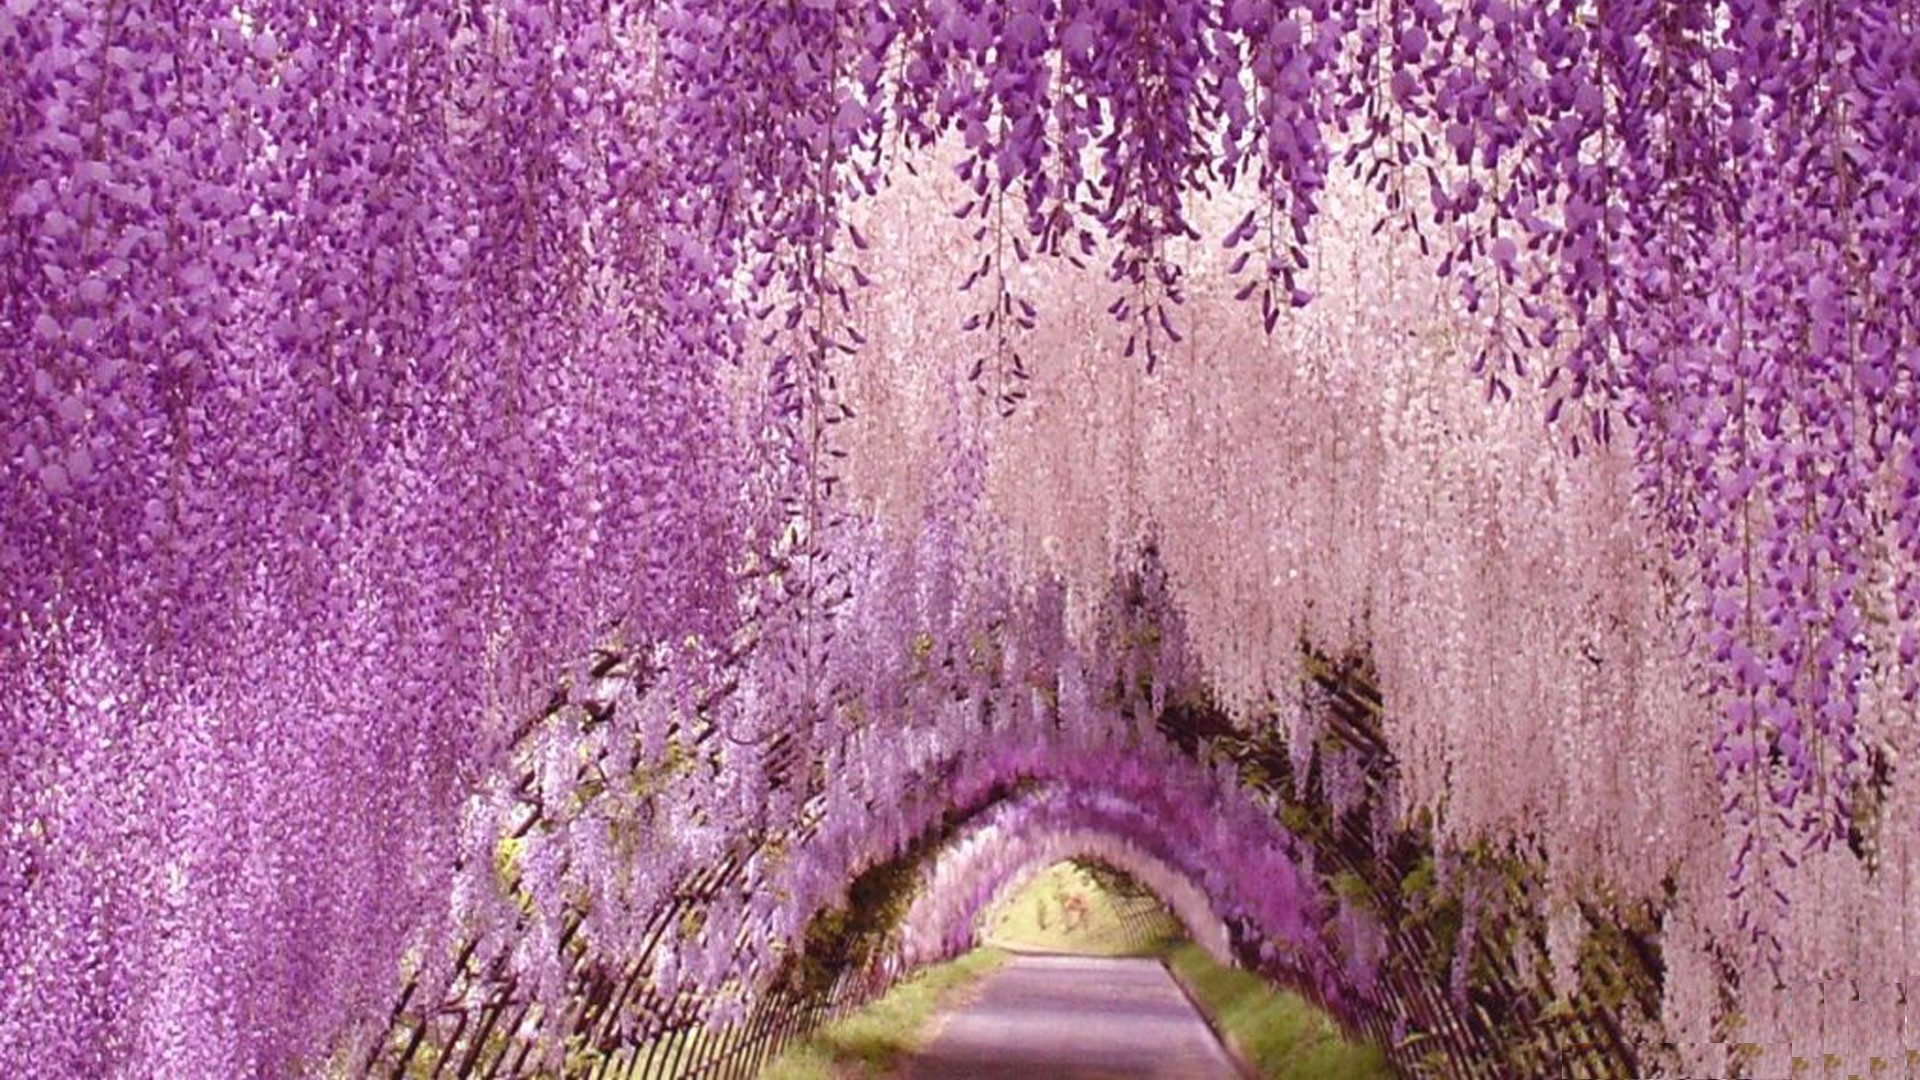 1920x1080 Wisteria, Flower, Tunnel, Desktop, Background, Wallpaper, Images, Download,  Full, Free, Amazing Pictures, Free, Wallpaper Of Iphone, 1920Ã1080 Wallpaper  HD